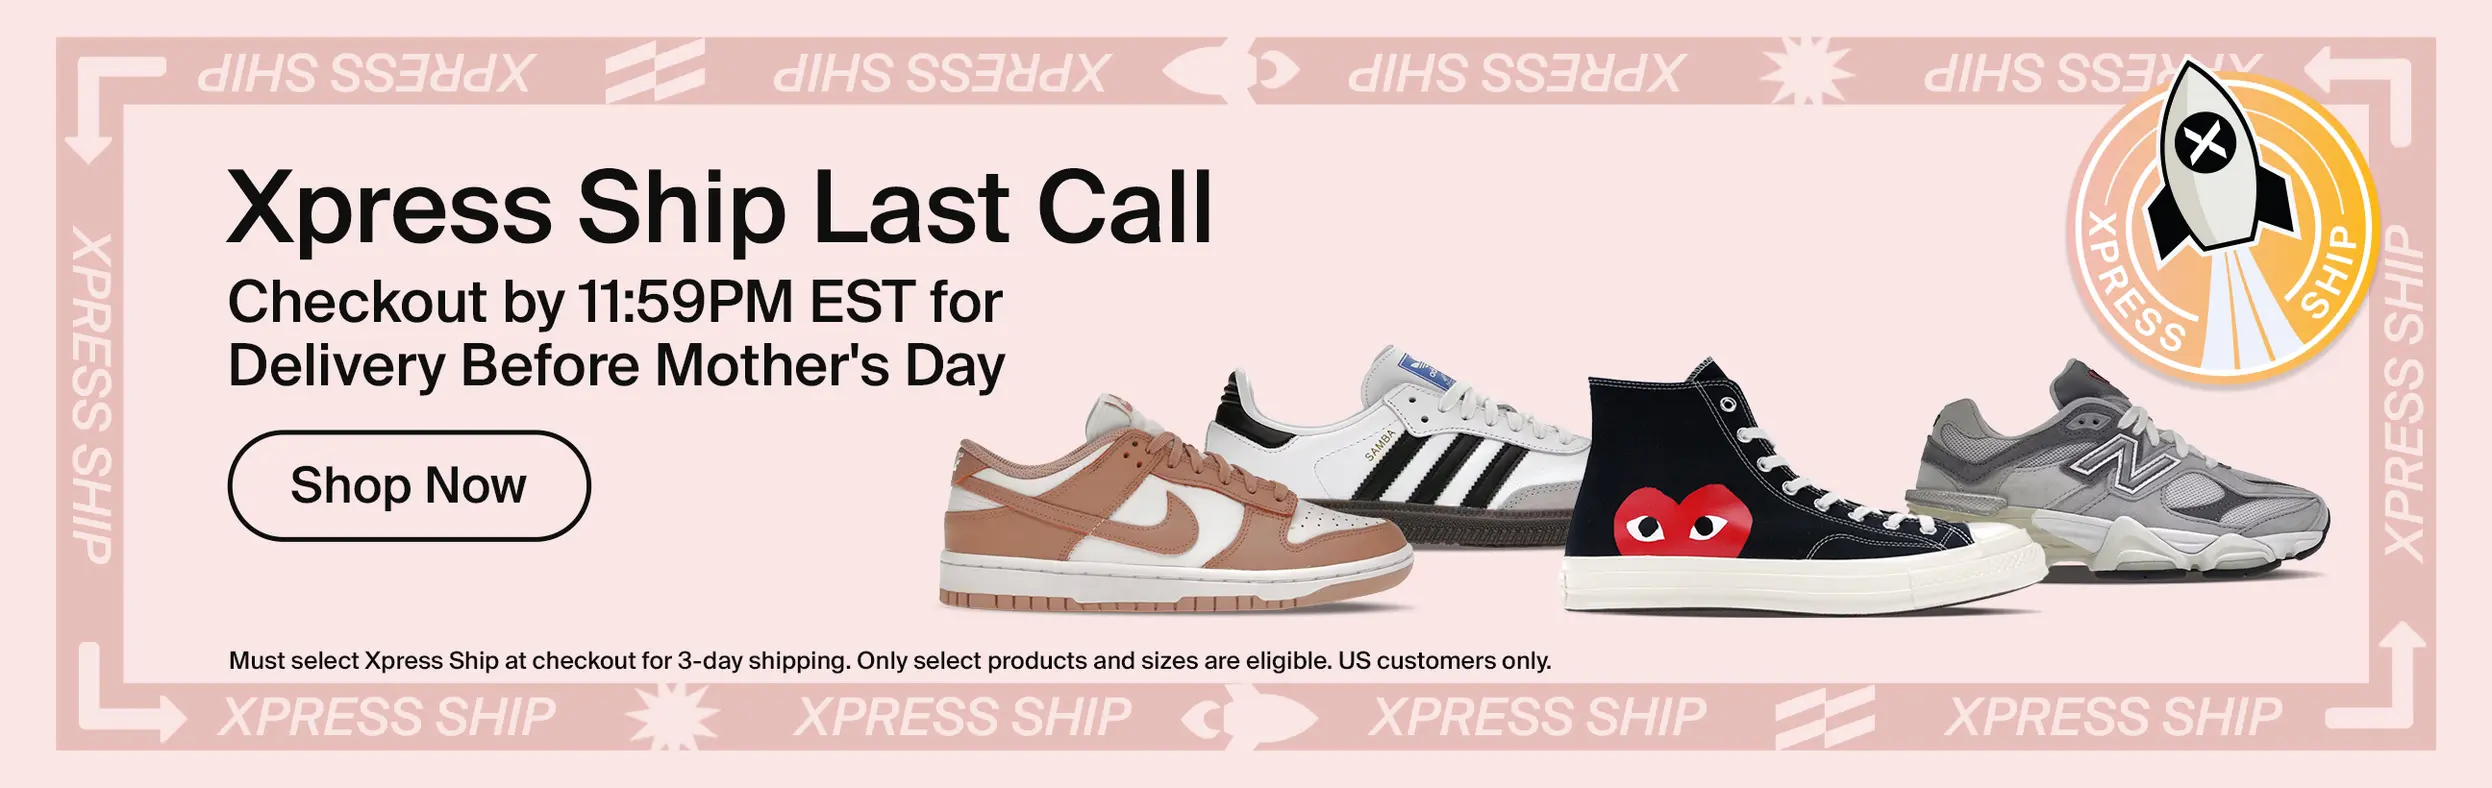 Mother_s_Day_Xpress_Ship_Sneakers_Last_Day_To_Order2Primary_Desktop.jpg